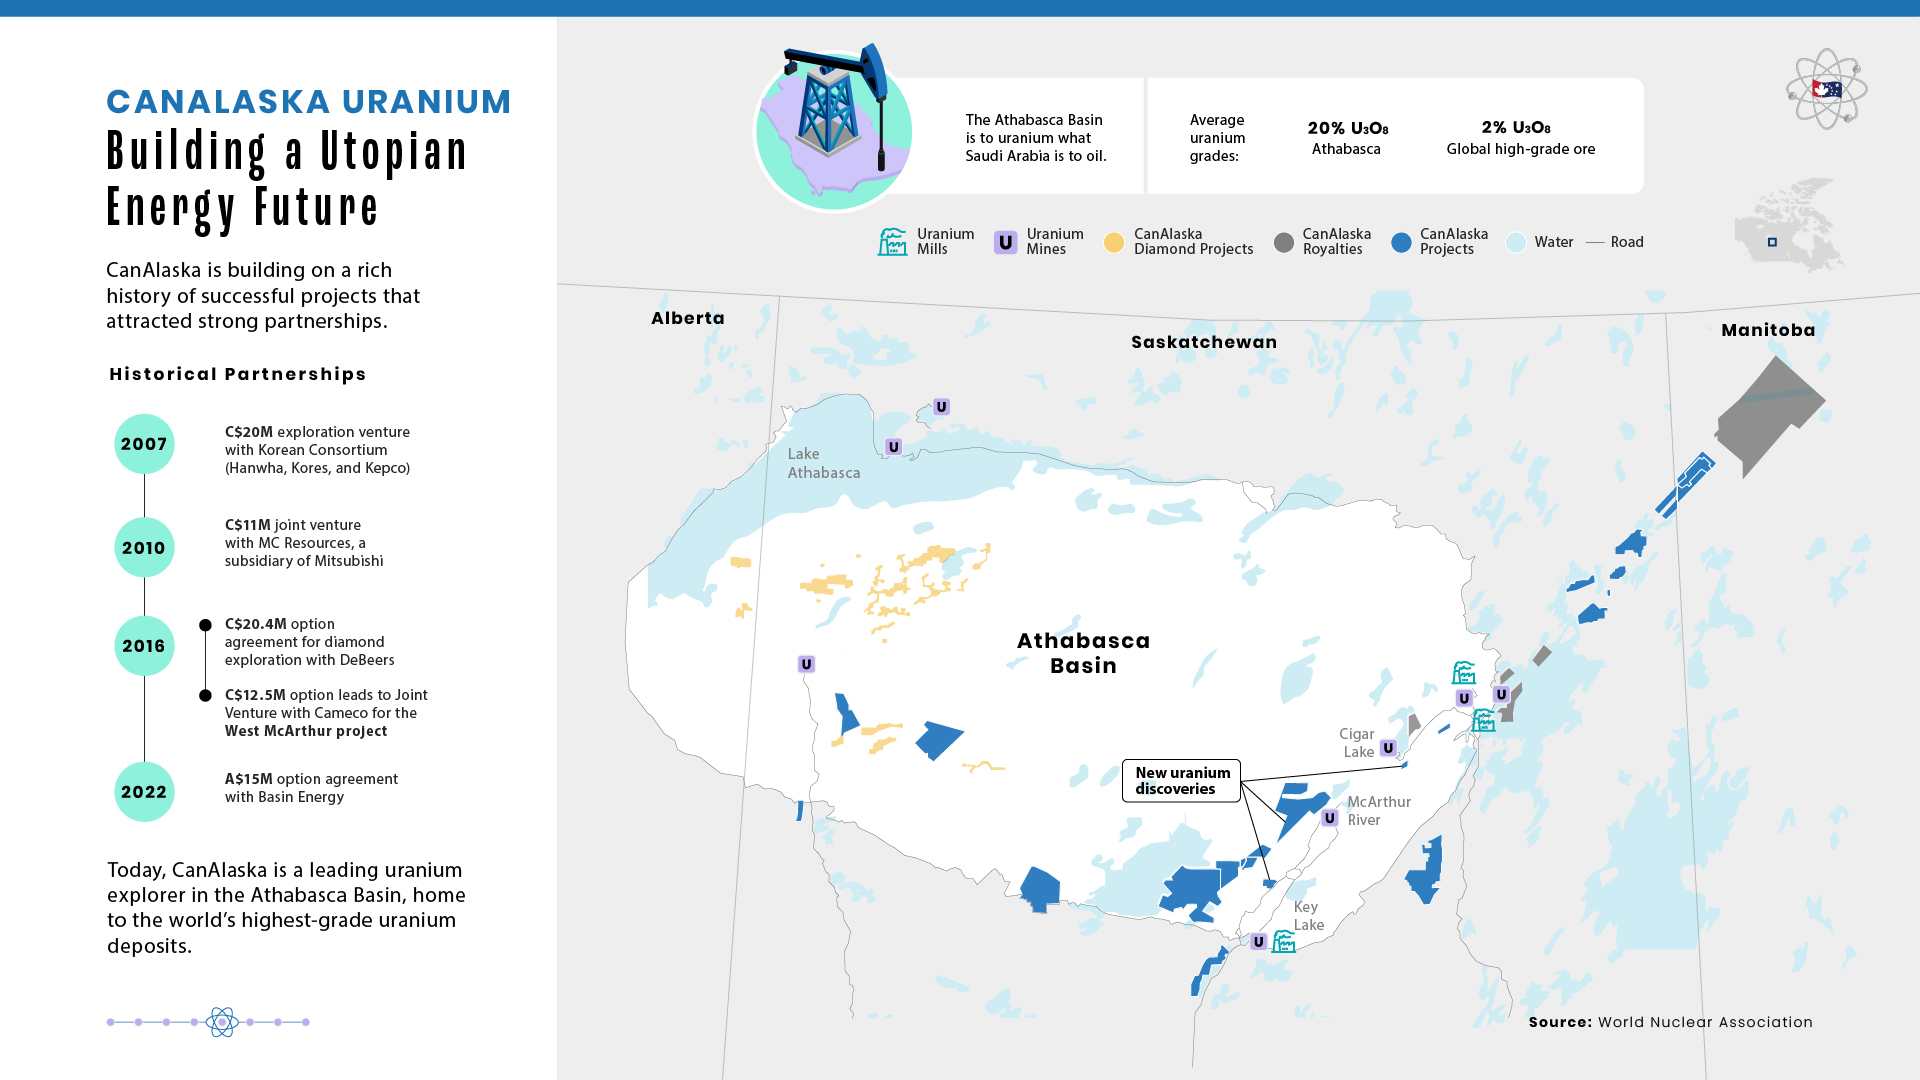 Map of Athabasca Basin, home to the world’s highest-grade uranium deposits